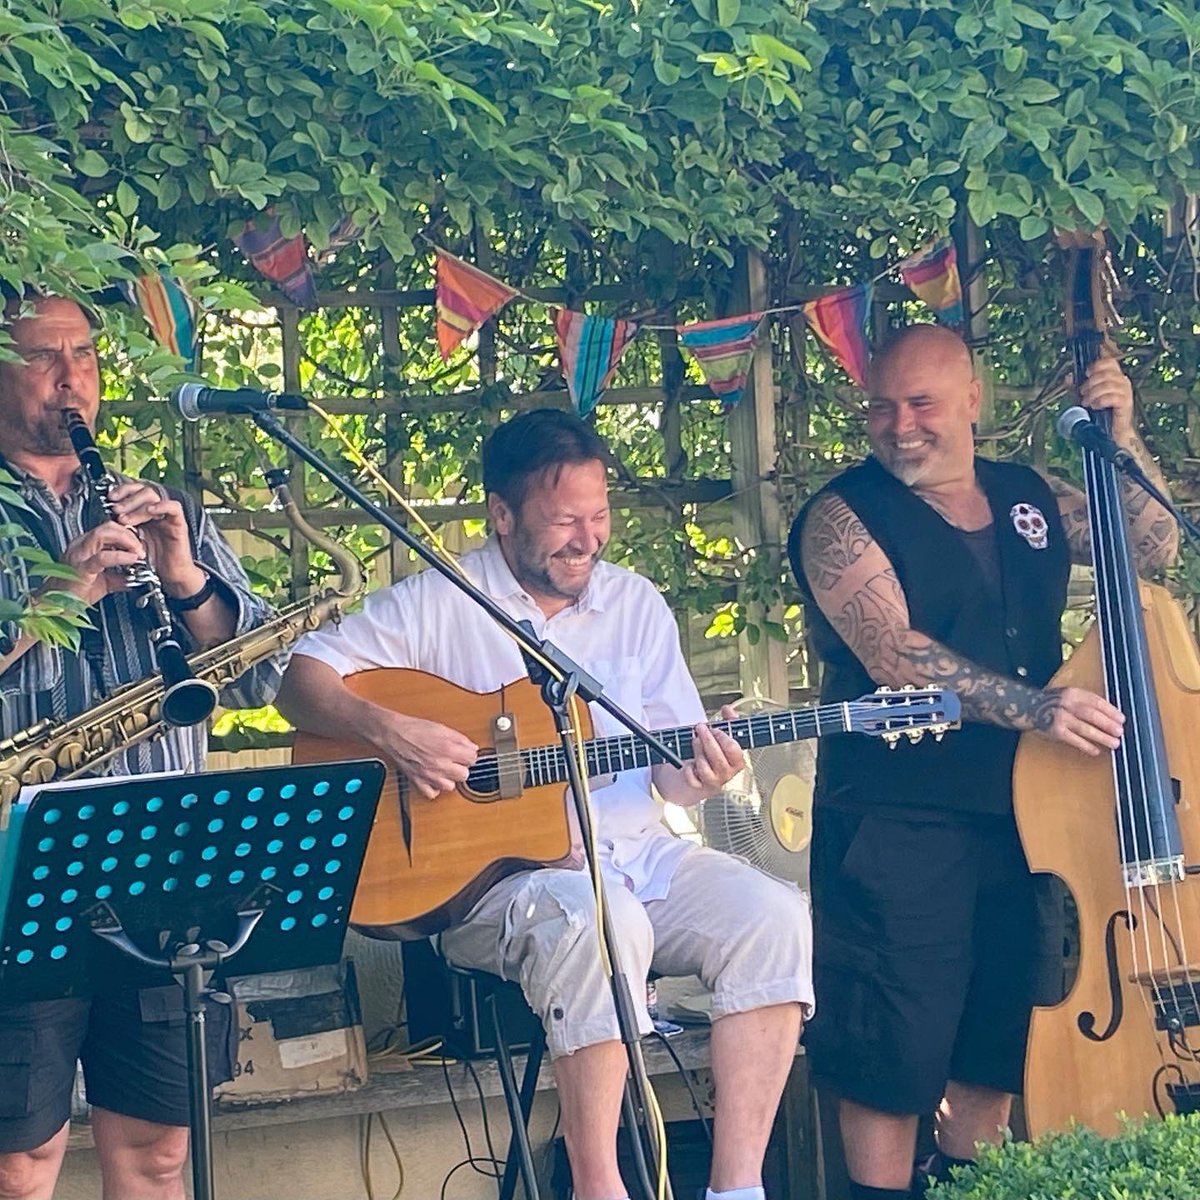 Lovely gig a few days ago in #whitstable #Kent hiding in the shrubbery & playing swing classics. #gypsyjazz #rocknroll #swingjazz #livemusic